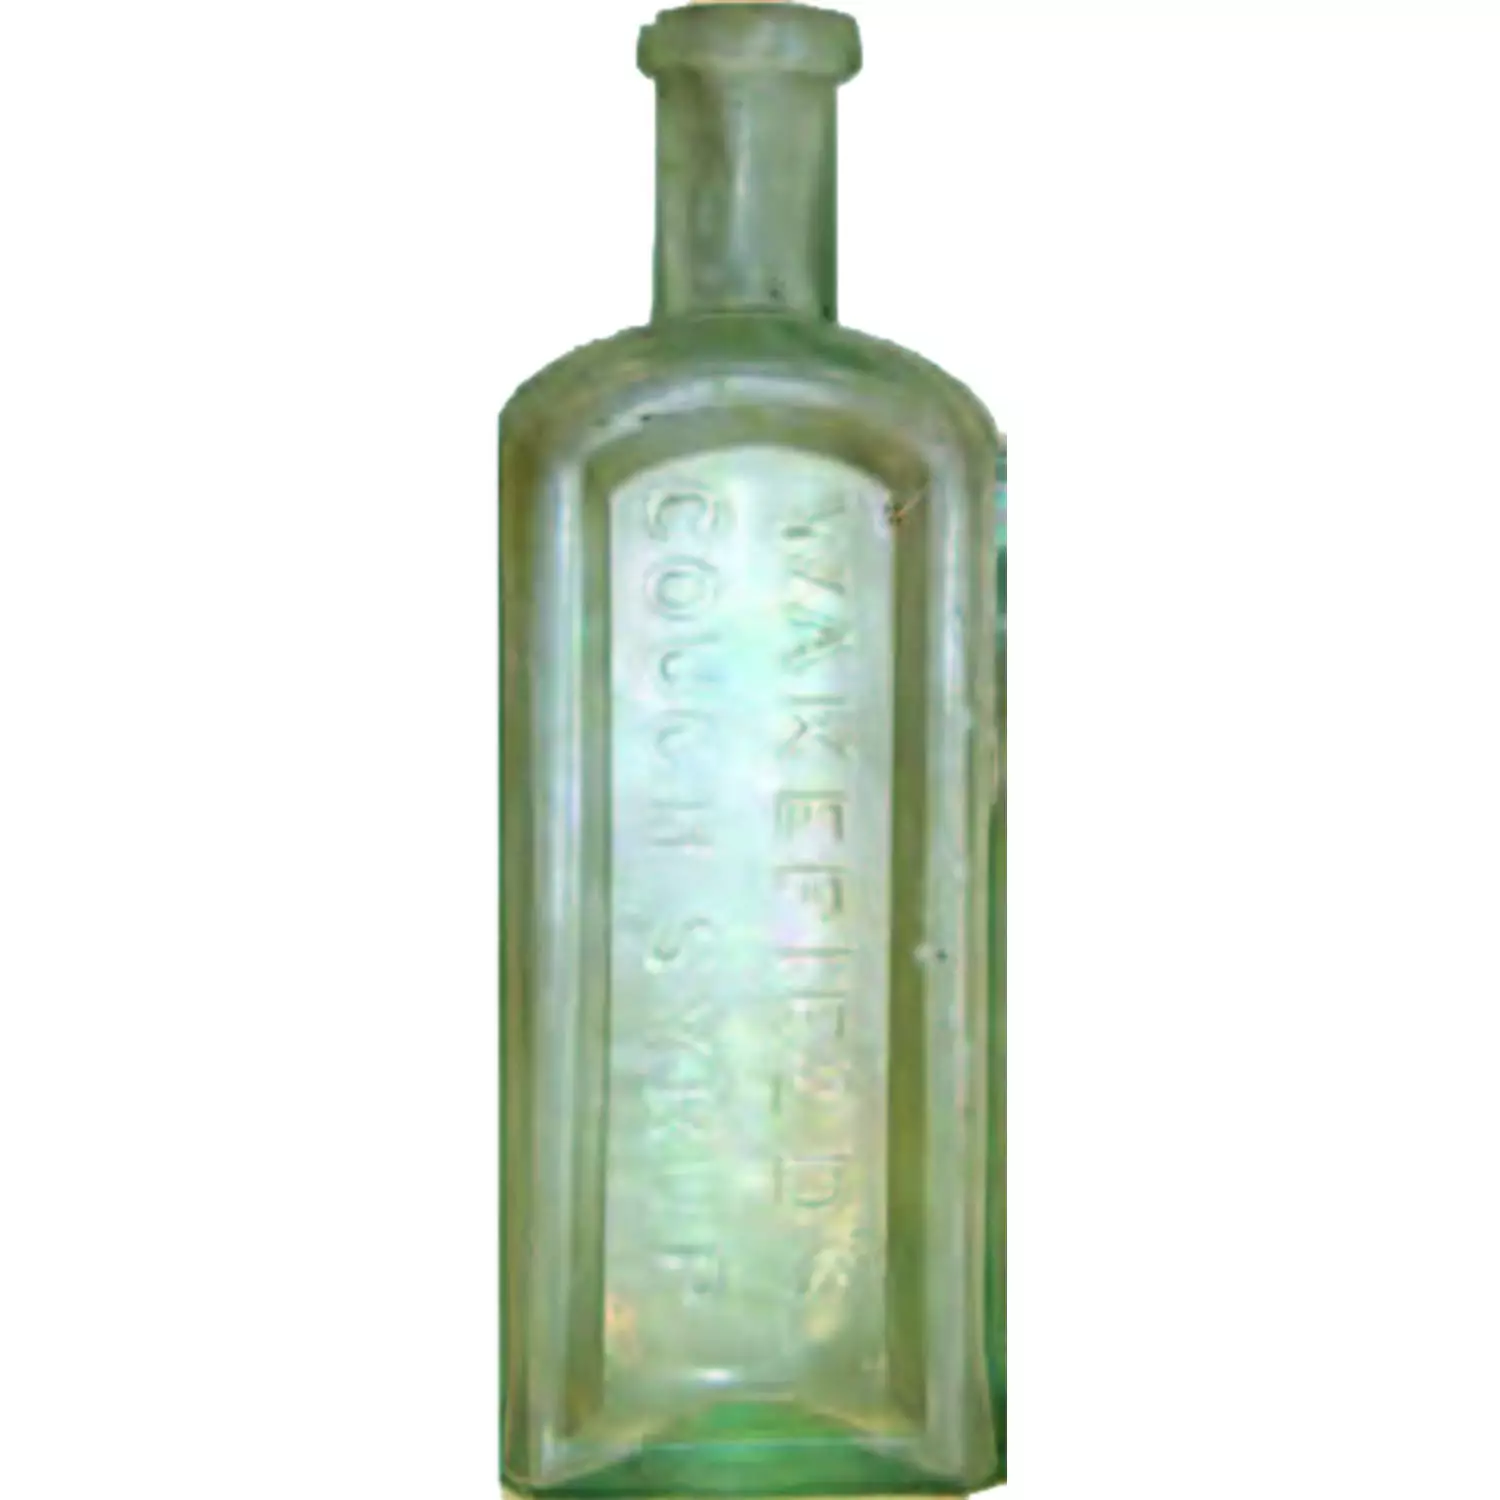 a clear bottle with a green tint with Wakefield's imprinted on the bottle. no label.